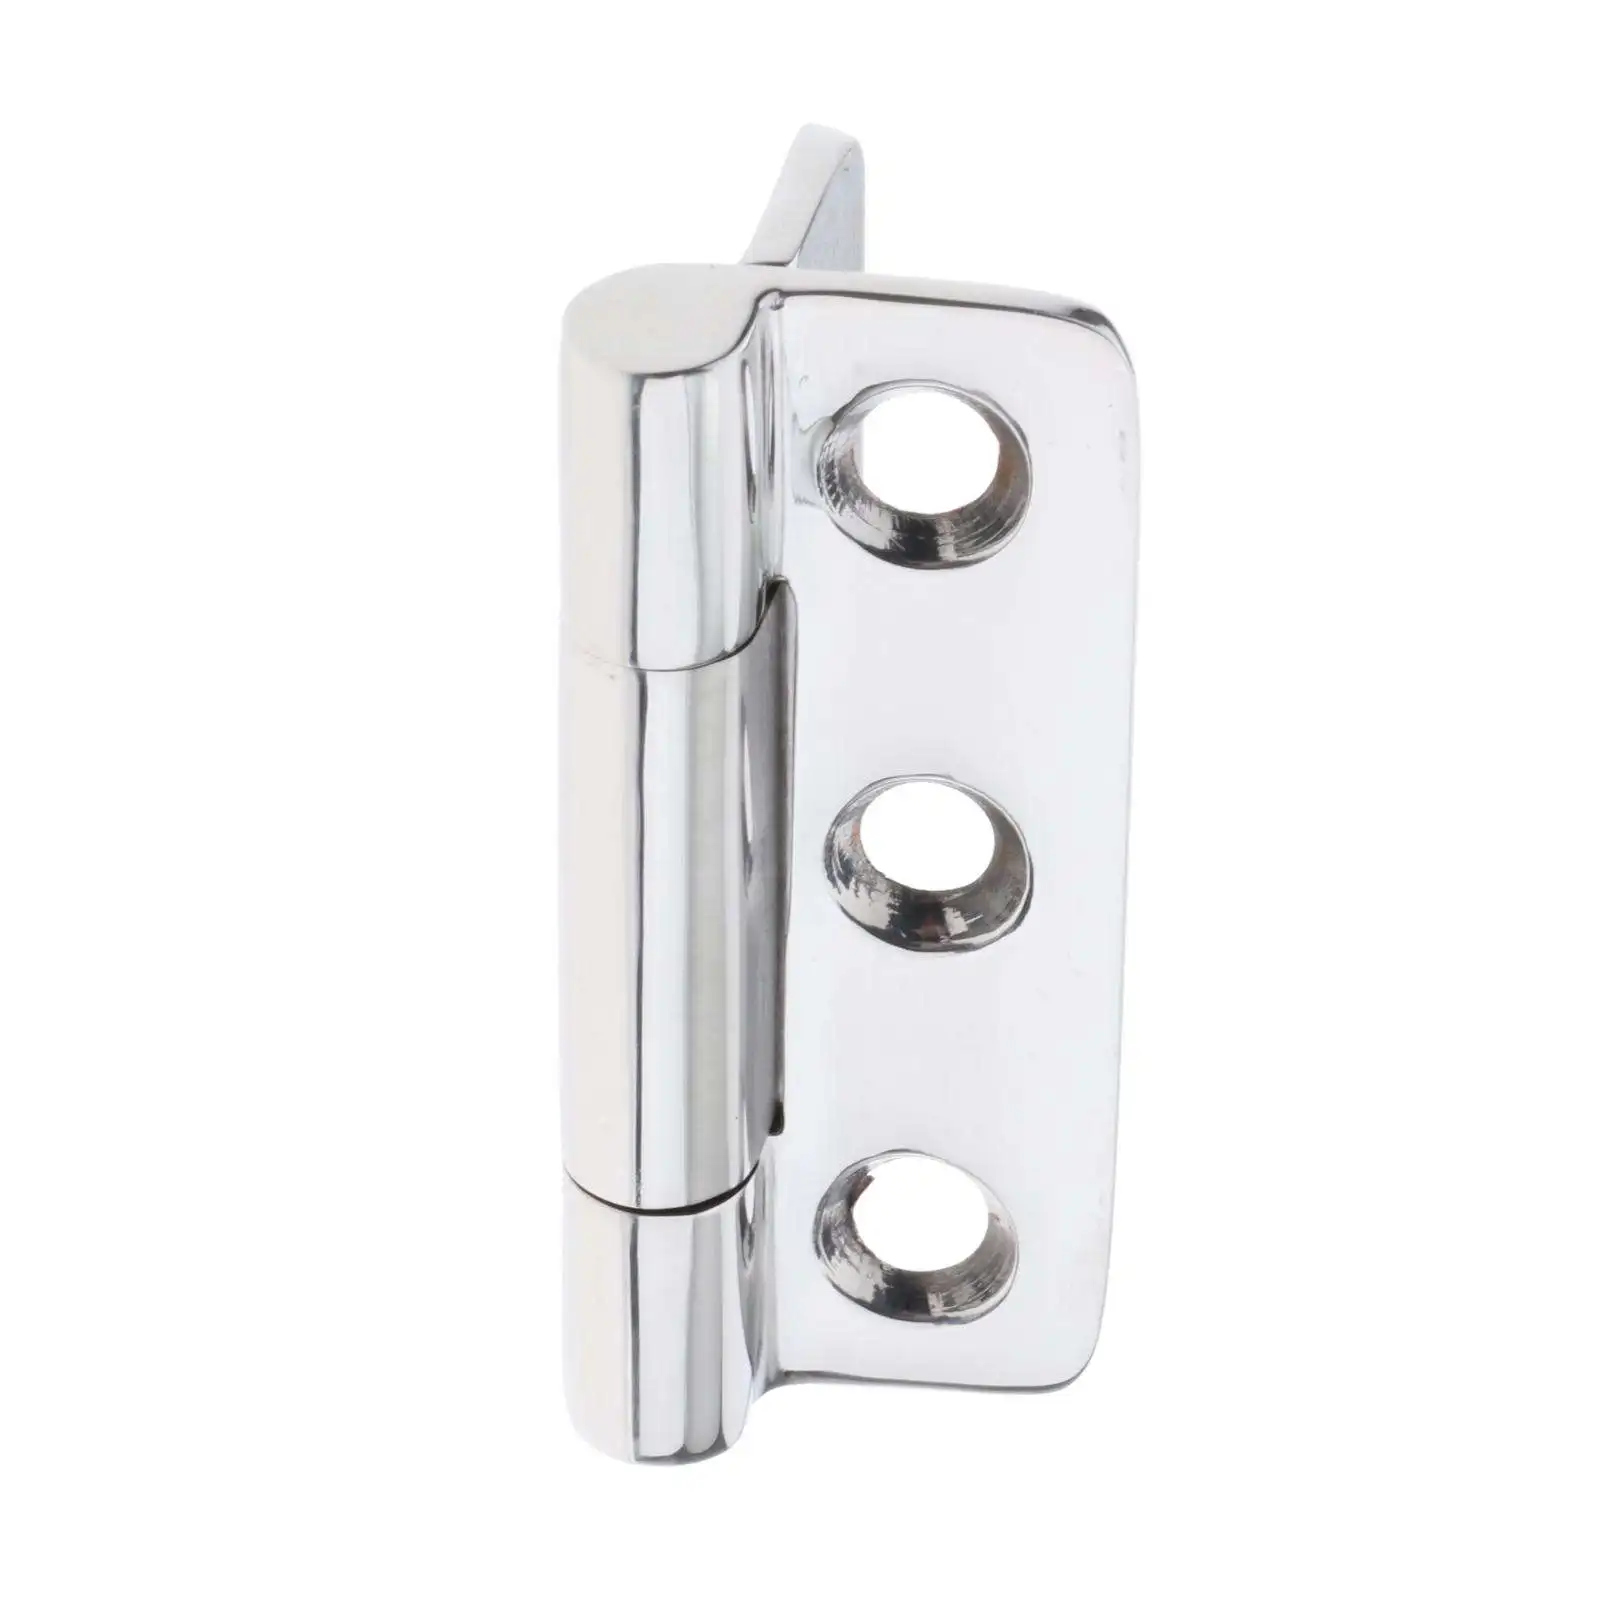 6 Holes Marine Grade Heavy Duty Stainless Steel Polished Marine Boat Yacht Hinges Universal for Cabinet Door Hardware